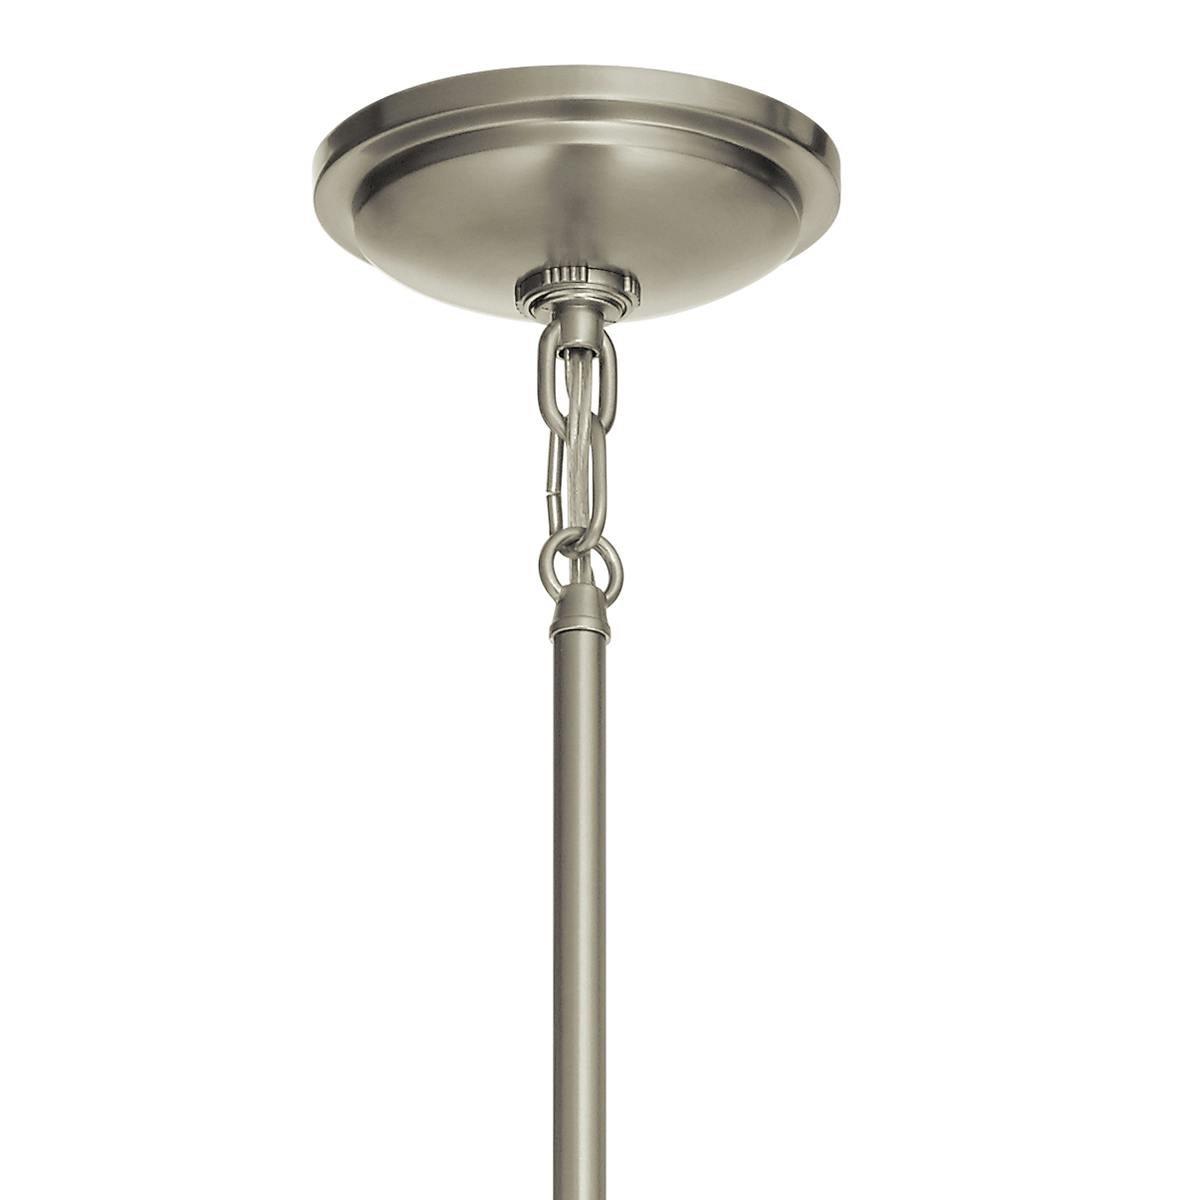 Canopy for the Tollis 12.5" 1 Light Mini Pendant Nickel on a white background